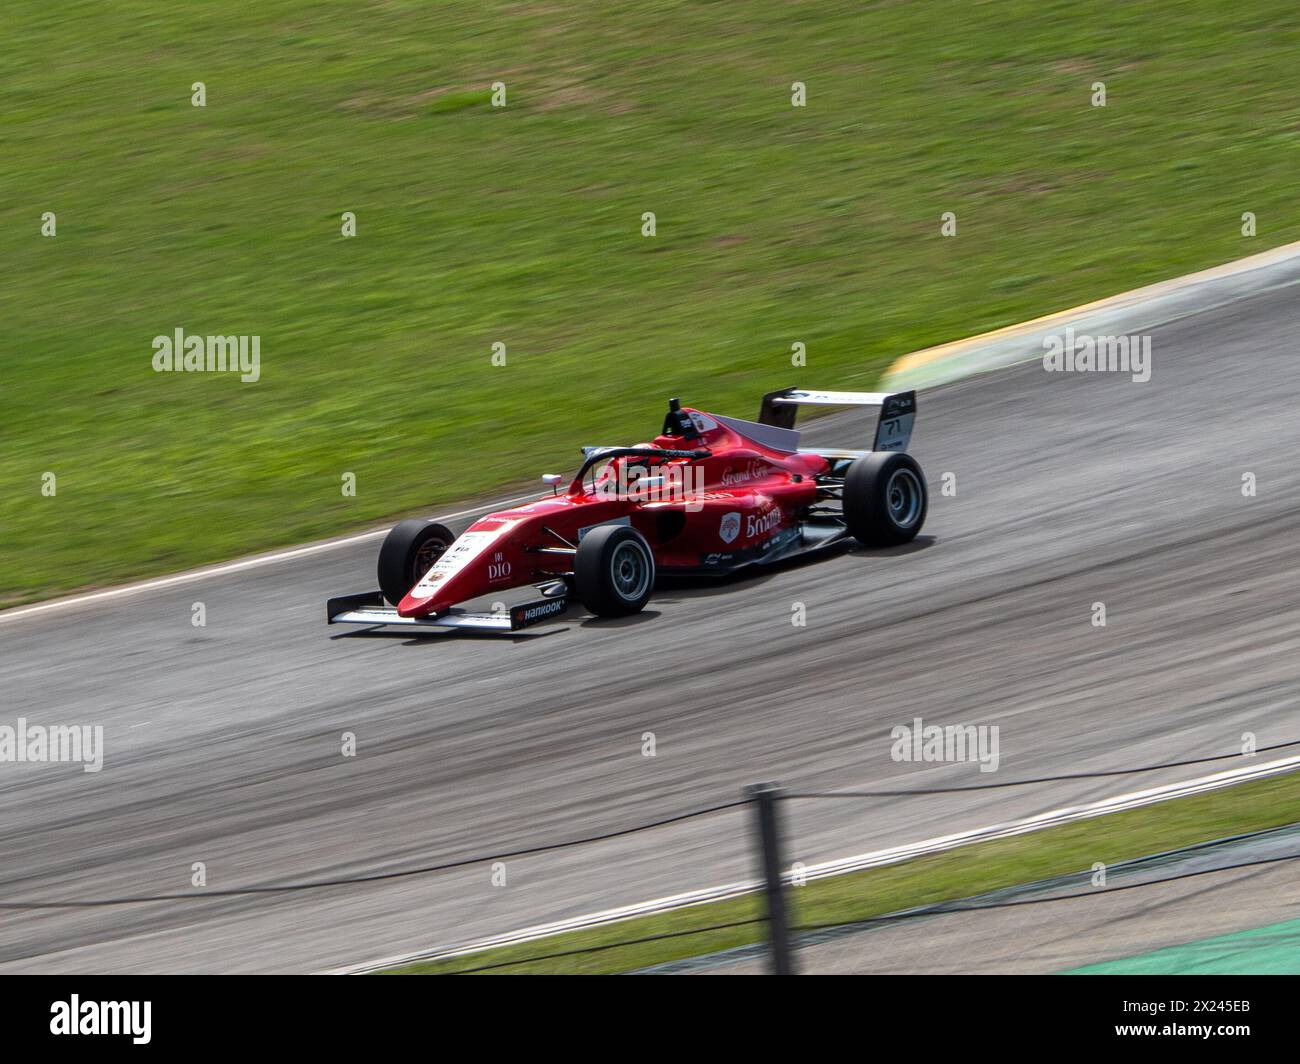 April 19, 2024, Sao Paulo, Sao Paulo, Brasil: SAO PAULO, (SP) - 04/19/2024 - STOCKCAR/MITSUBISHI/ESPORTE/SP - View of the free practice sessions for Stock Car, Formula 4 and the presentation of Mitsubishi as a new brand that will participate in Stock Car from the year 2025 with new SUV bodies. Fernando Julianelli, CEO of vicar, led the presentation with guests representing the Japanese brand and the drivers who best represented Mitsubishi in Stock Car at the beginning of the 200s, such as Caca Bueno and Ingo Hoffman, as well as driver Guilherme Spinelli, a big name for the company in the rally Stock Photo